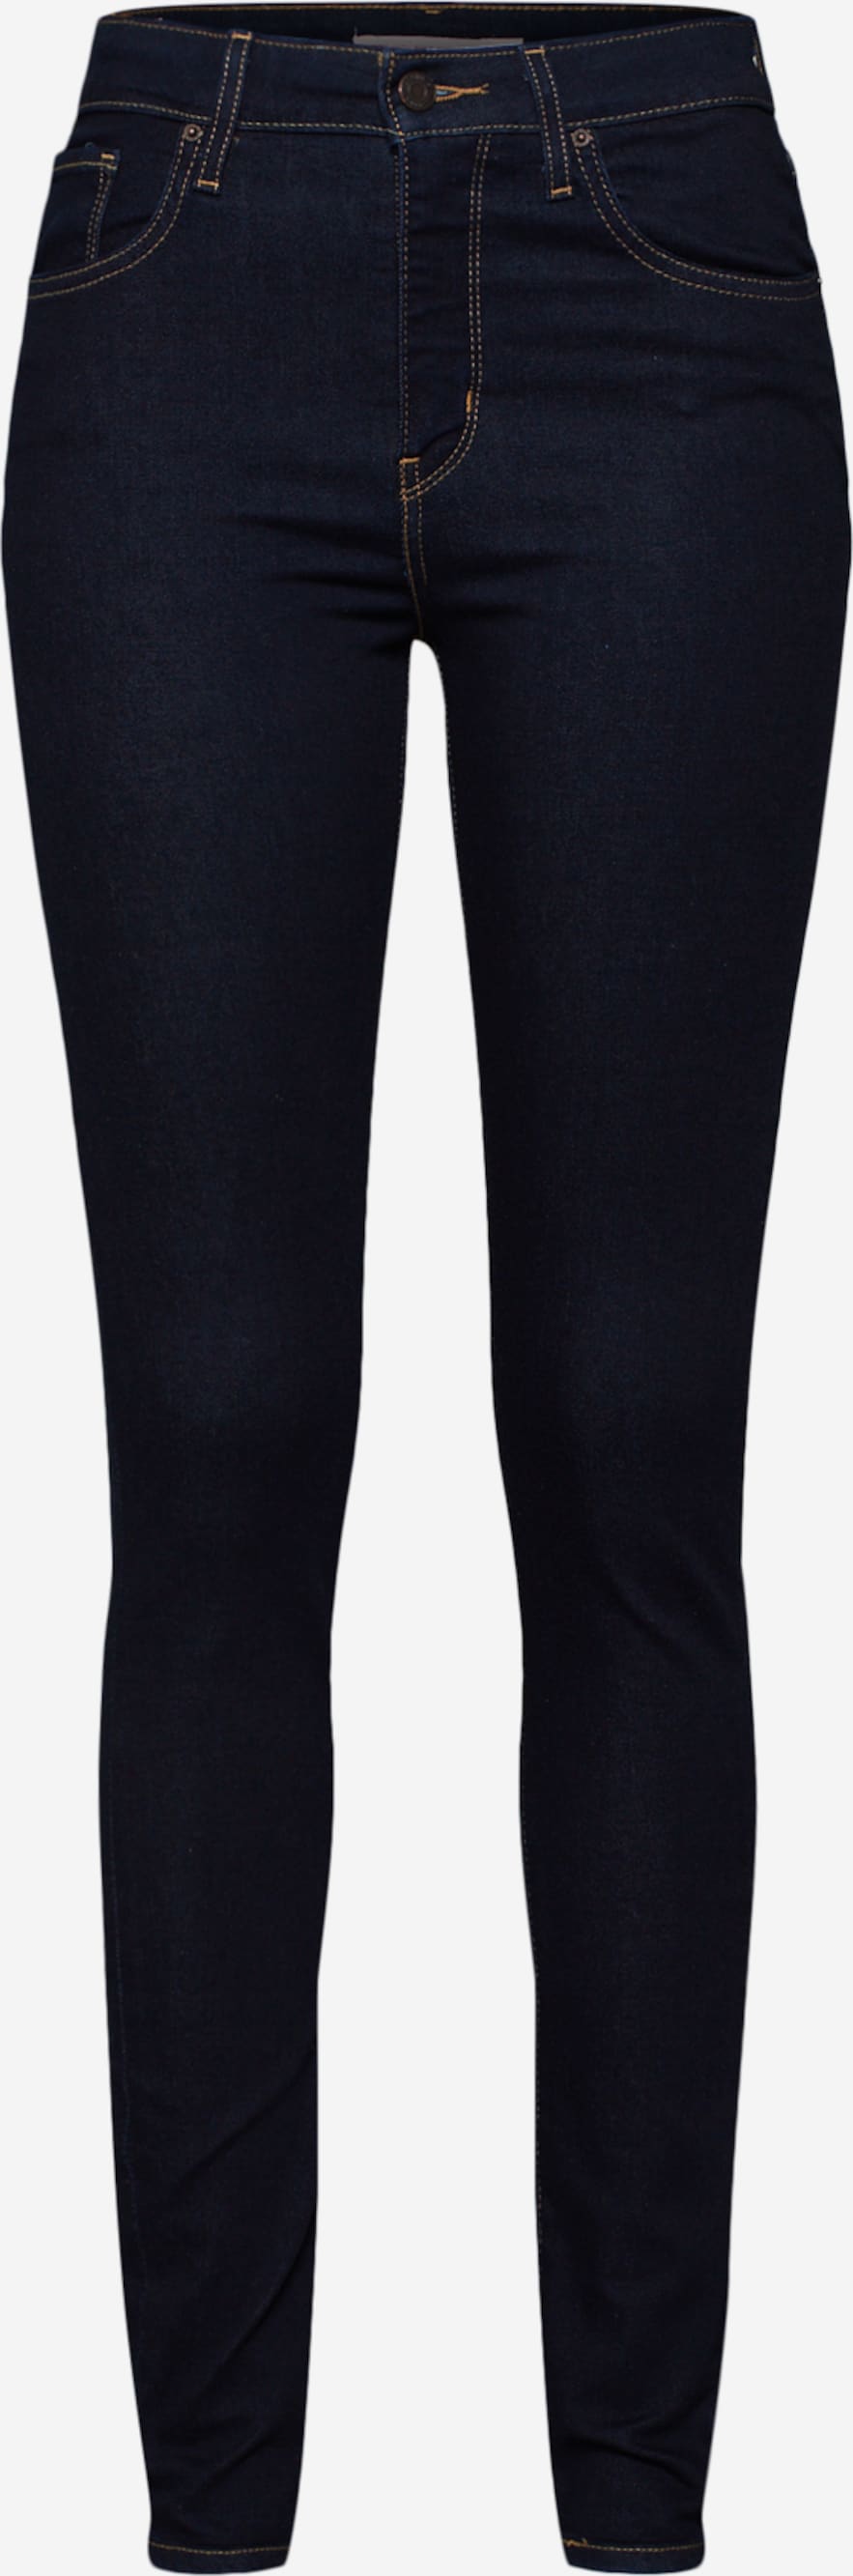 Levi’s 721 HIGH RISE SKINNY TO THE NI